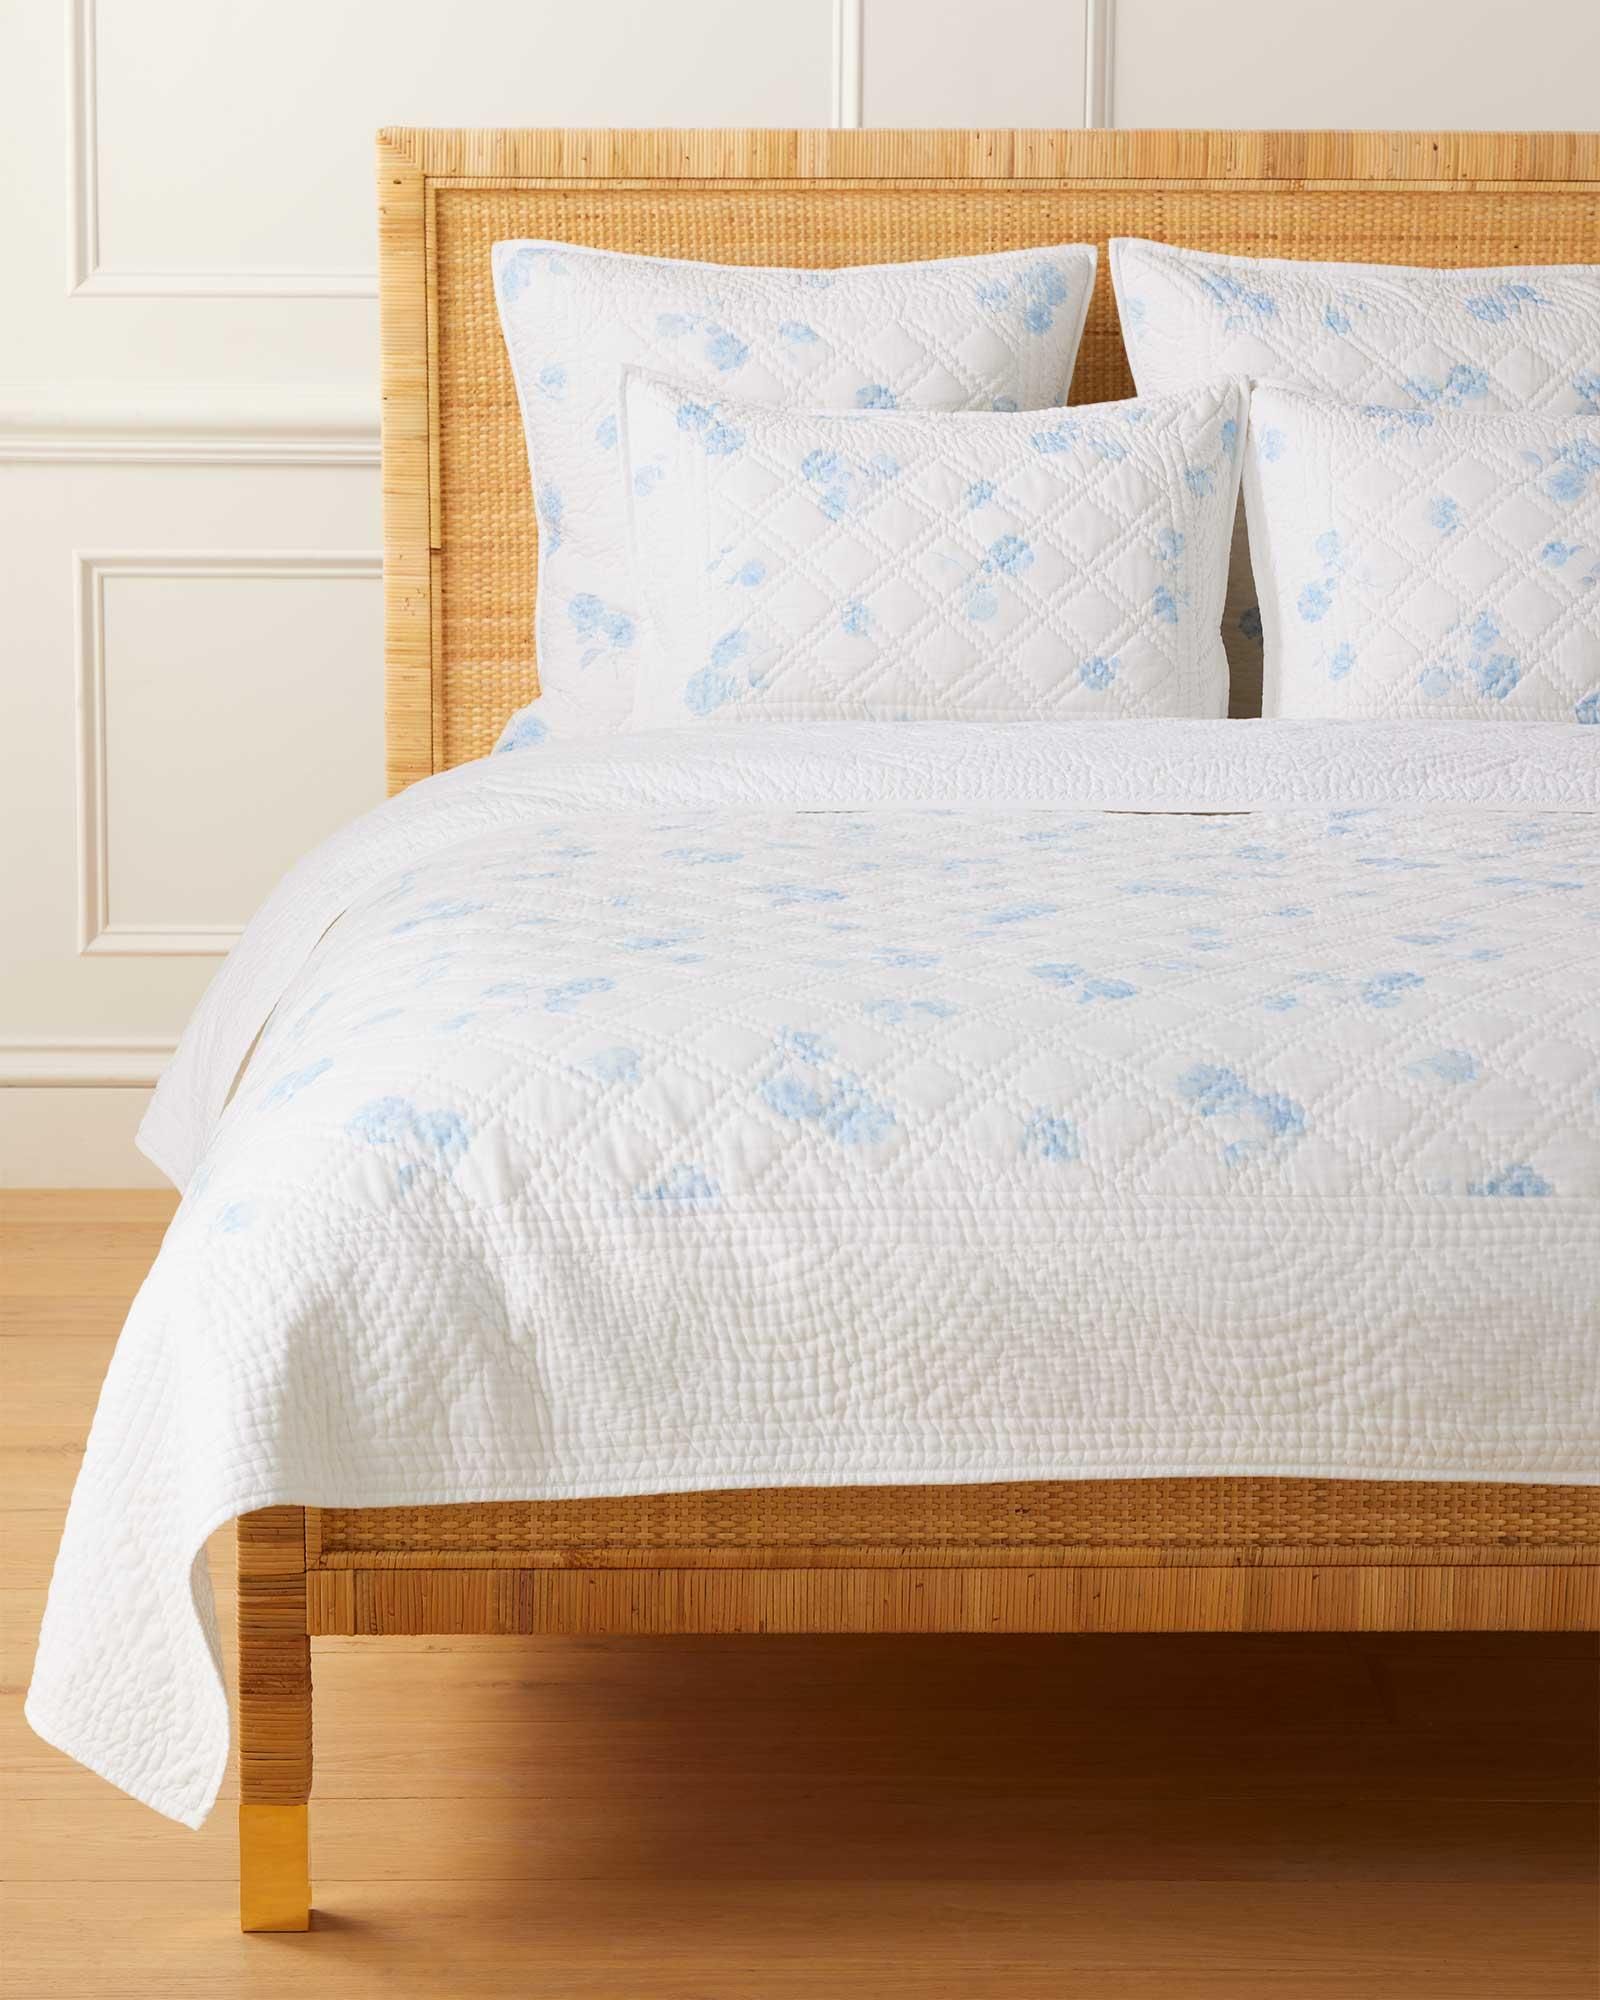 Hydrangea Quilt | Serena and Lily